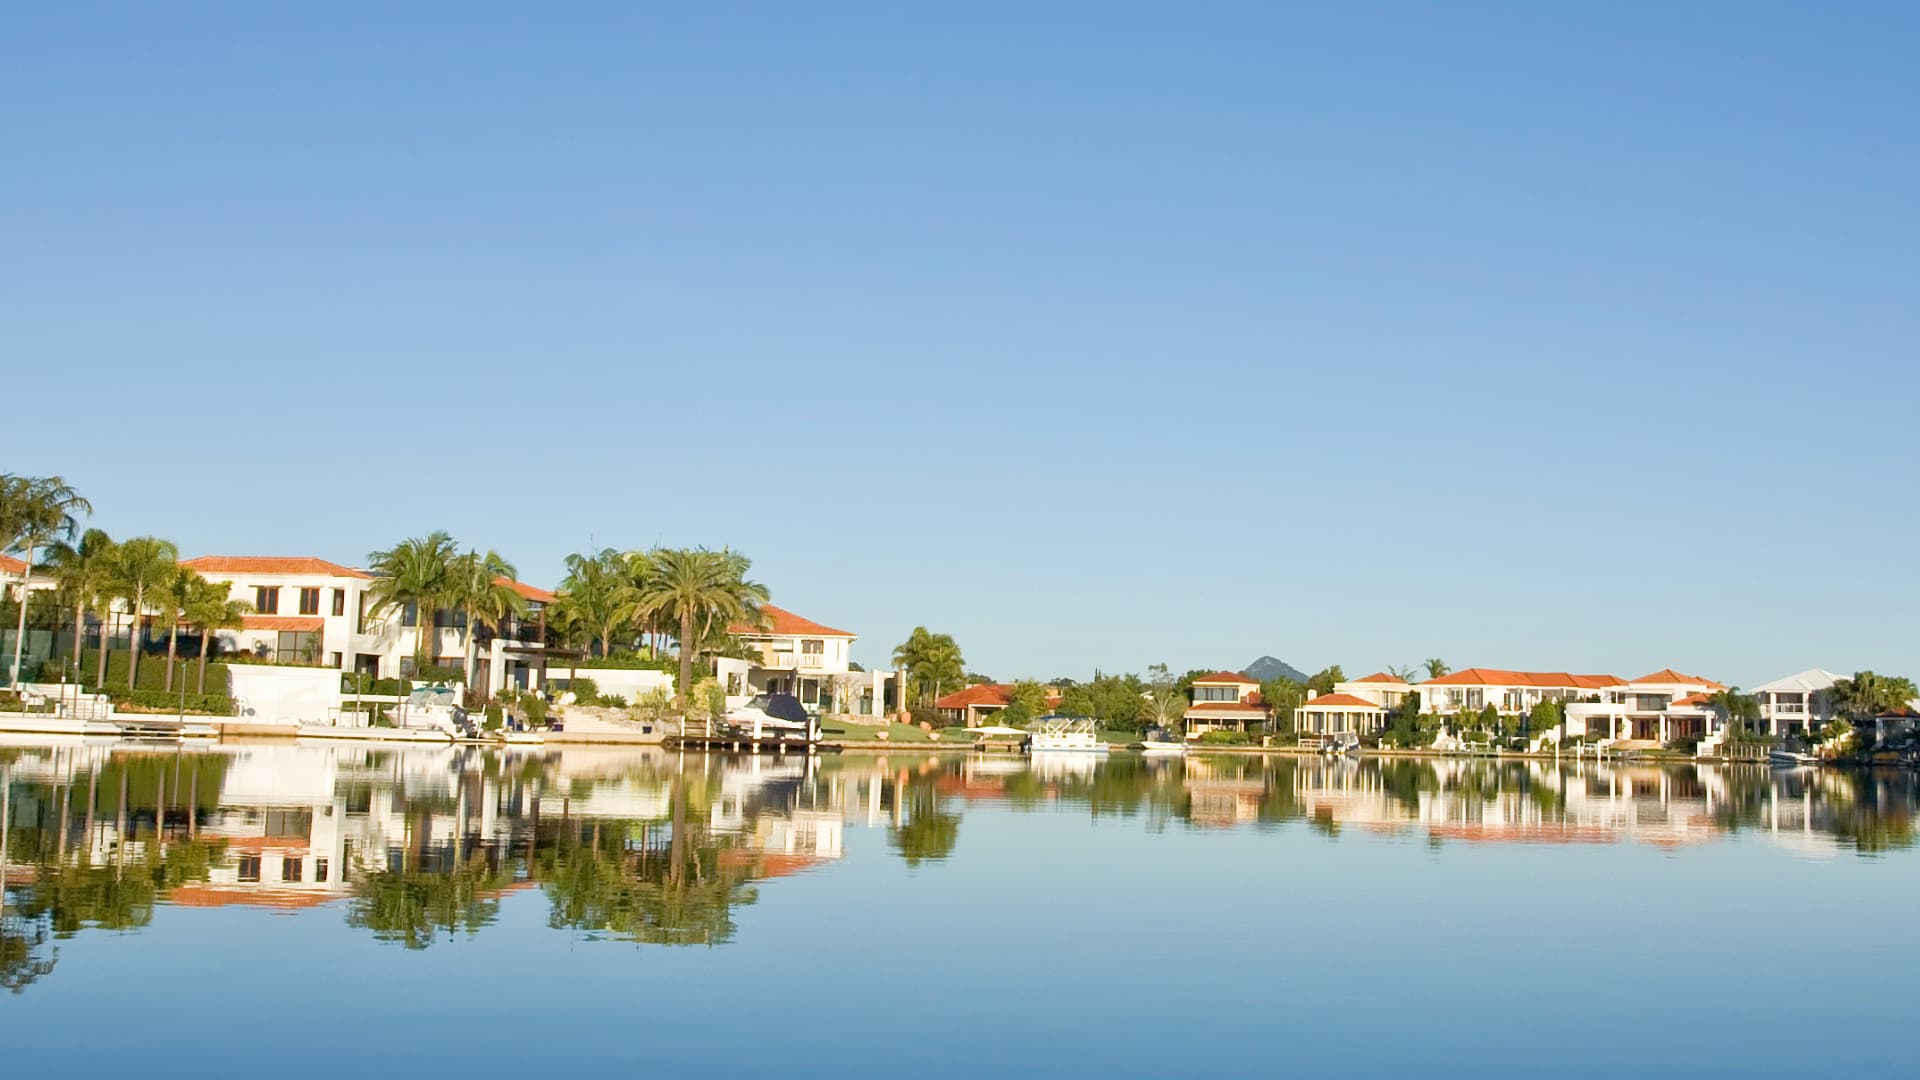 An image of a tranquil Florida Neighborhood real estate